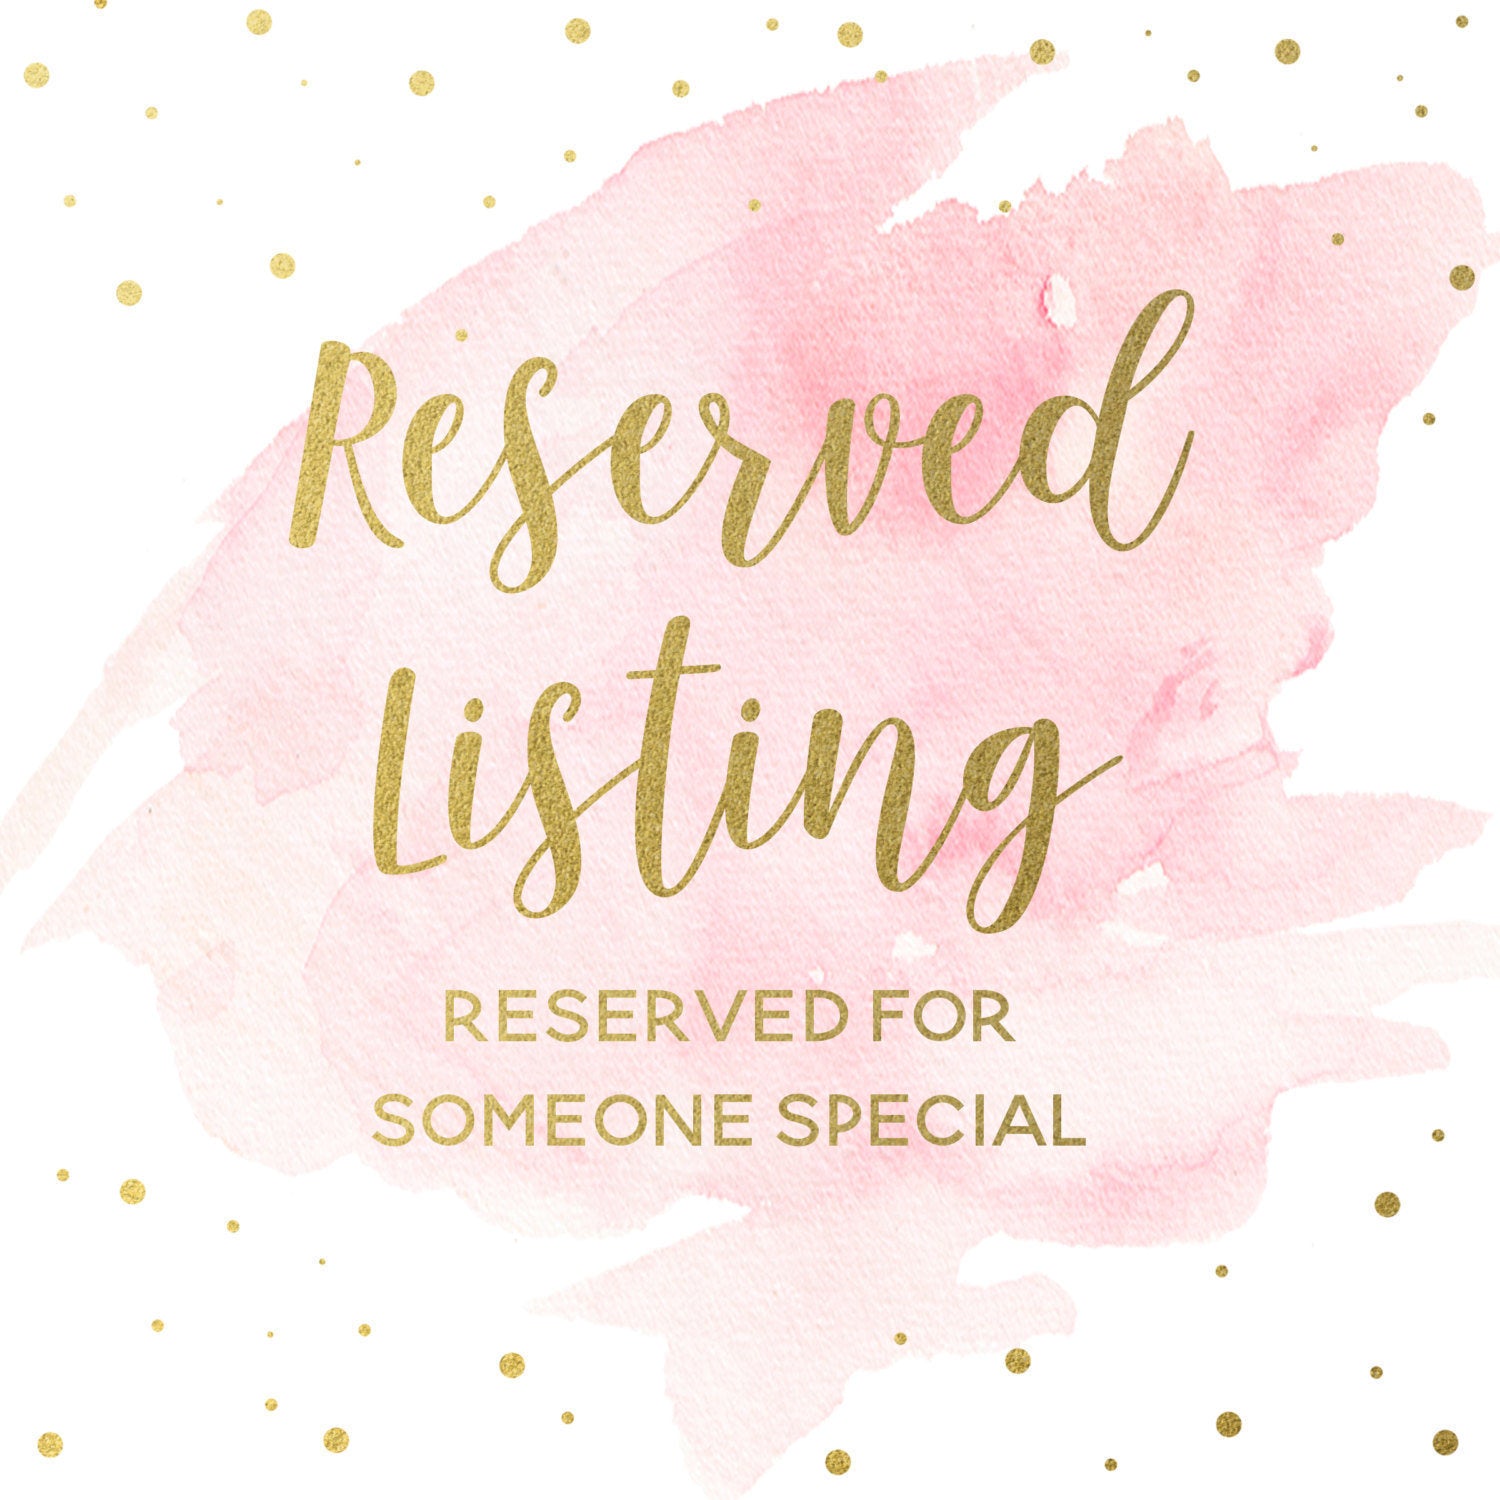 Reserved Listing - Shelly N